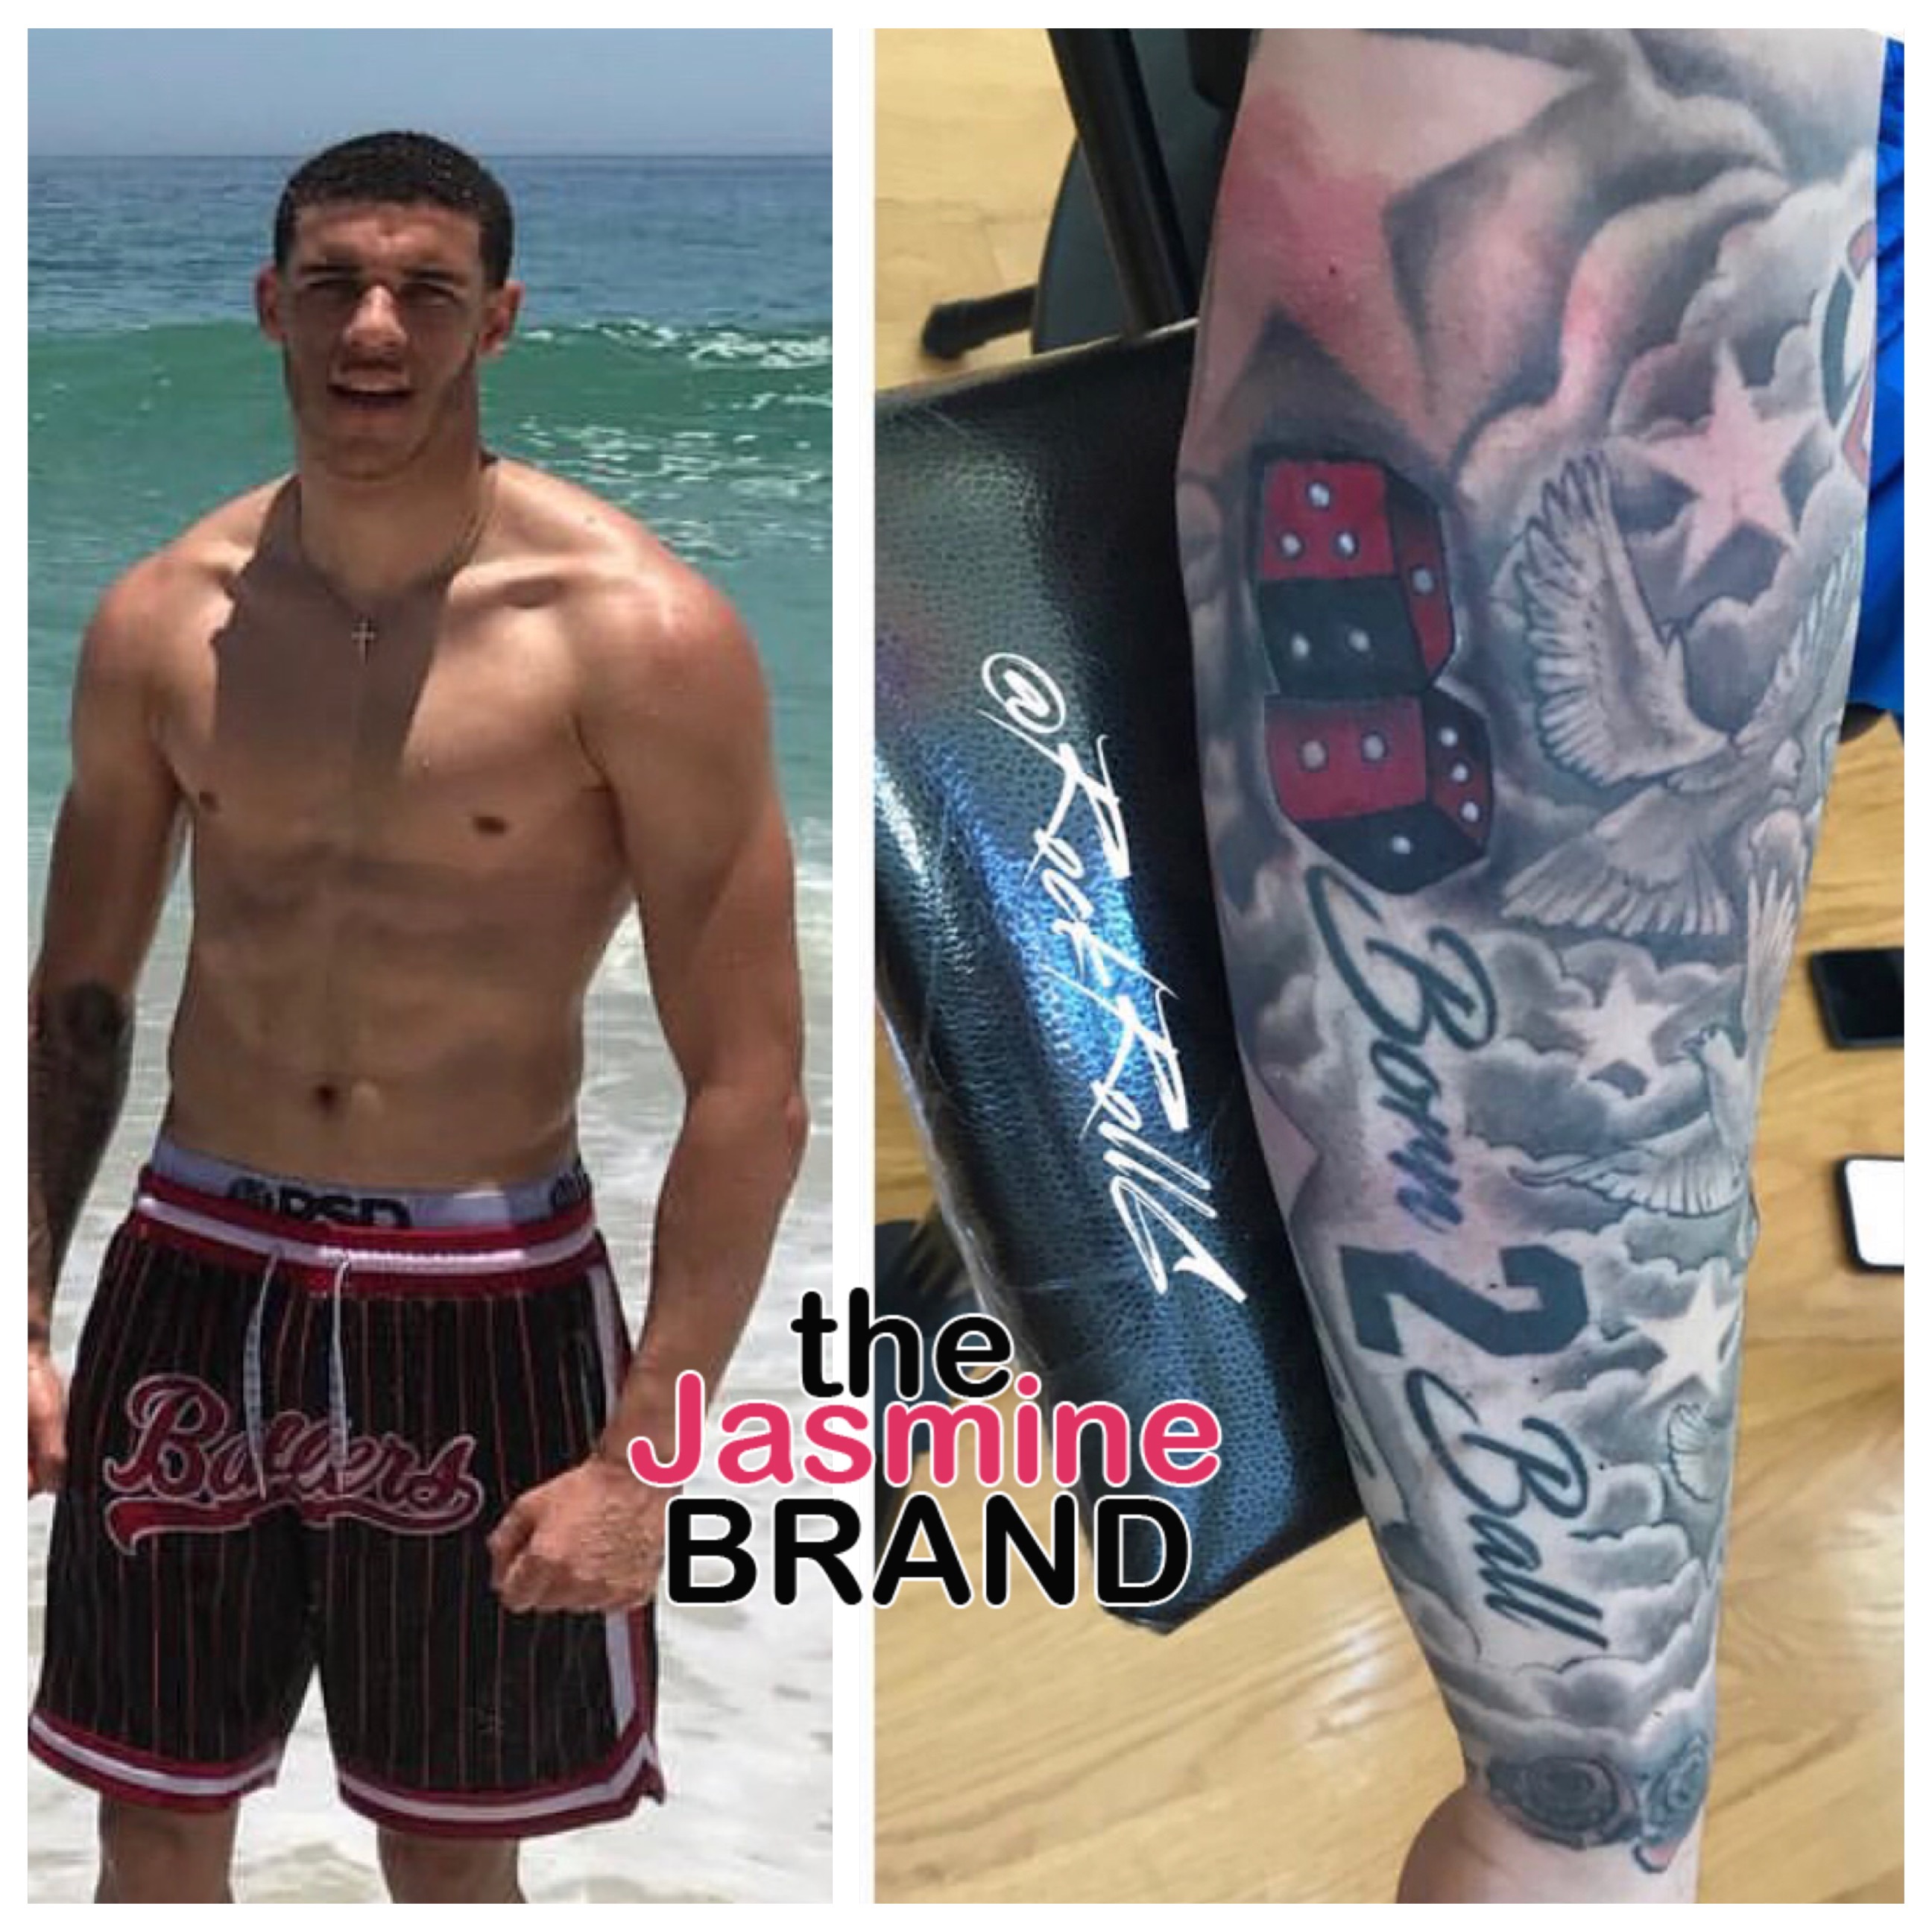 Lonzo Ball Explains Why He Covered Big Baller Brand Tattoo  Sole Collector